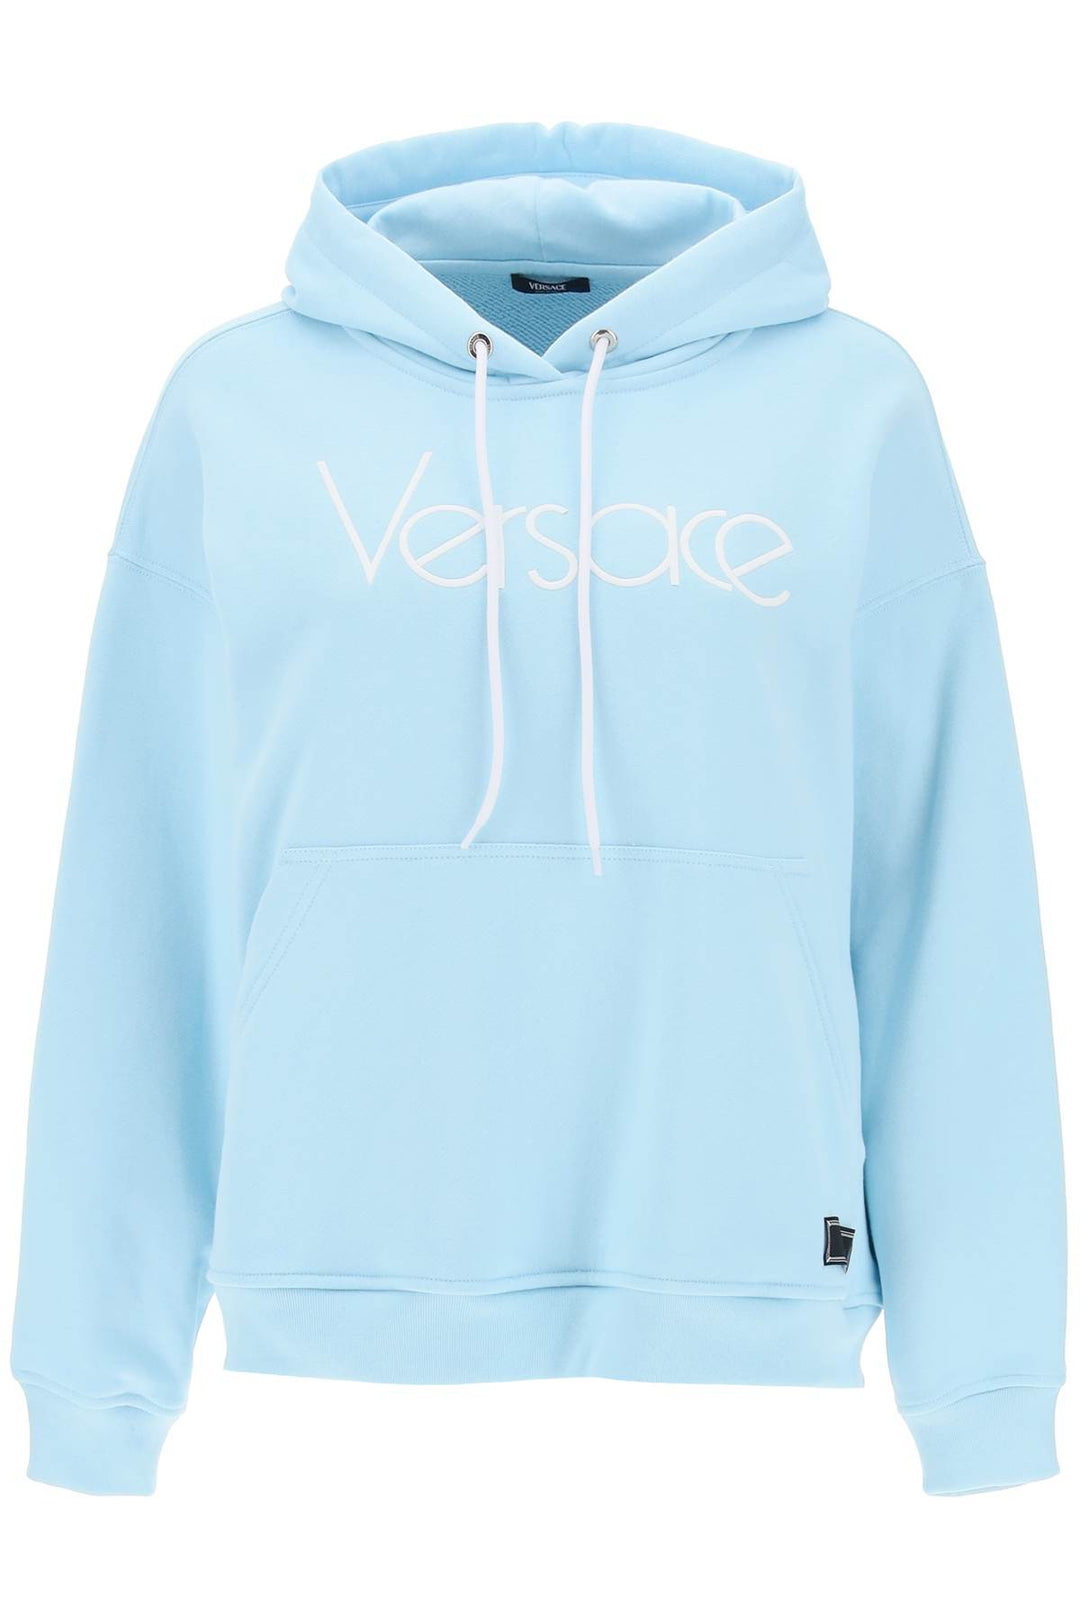 Versace Hoodie With 1978 Re Edition Logo   Celeste